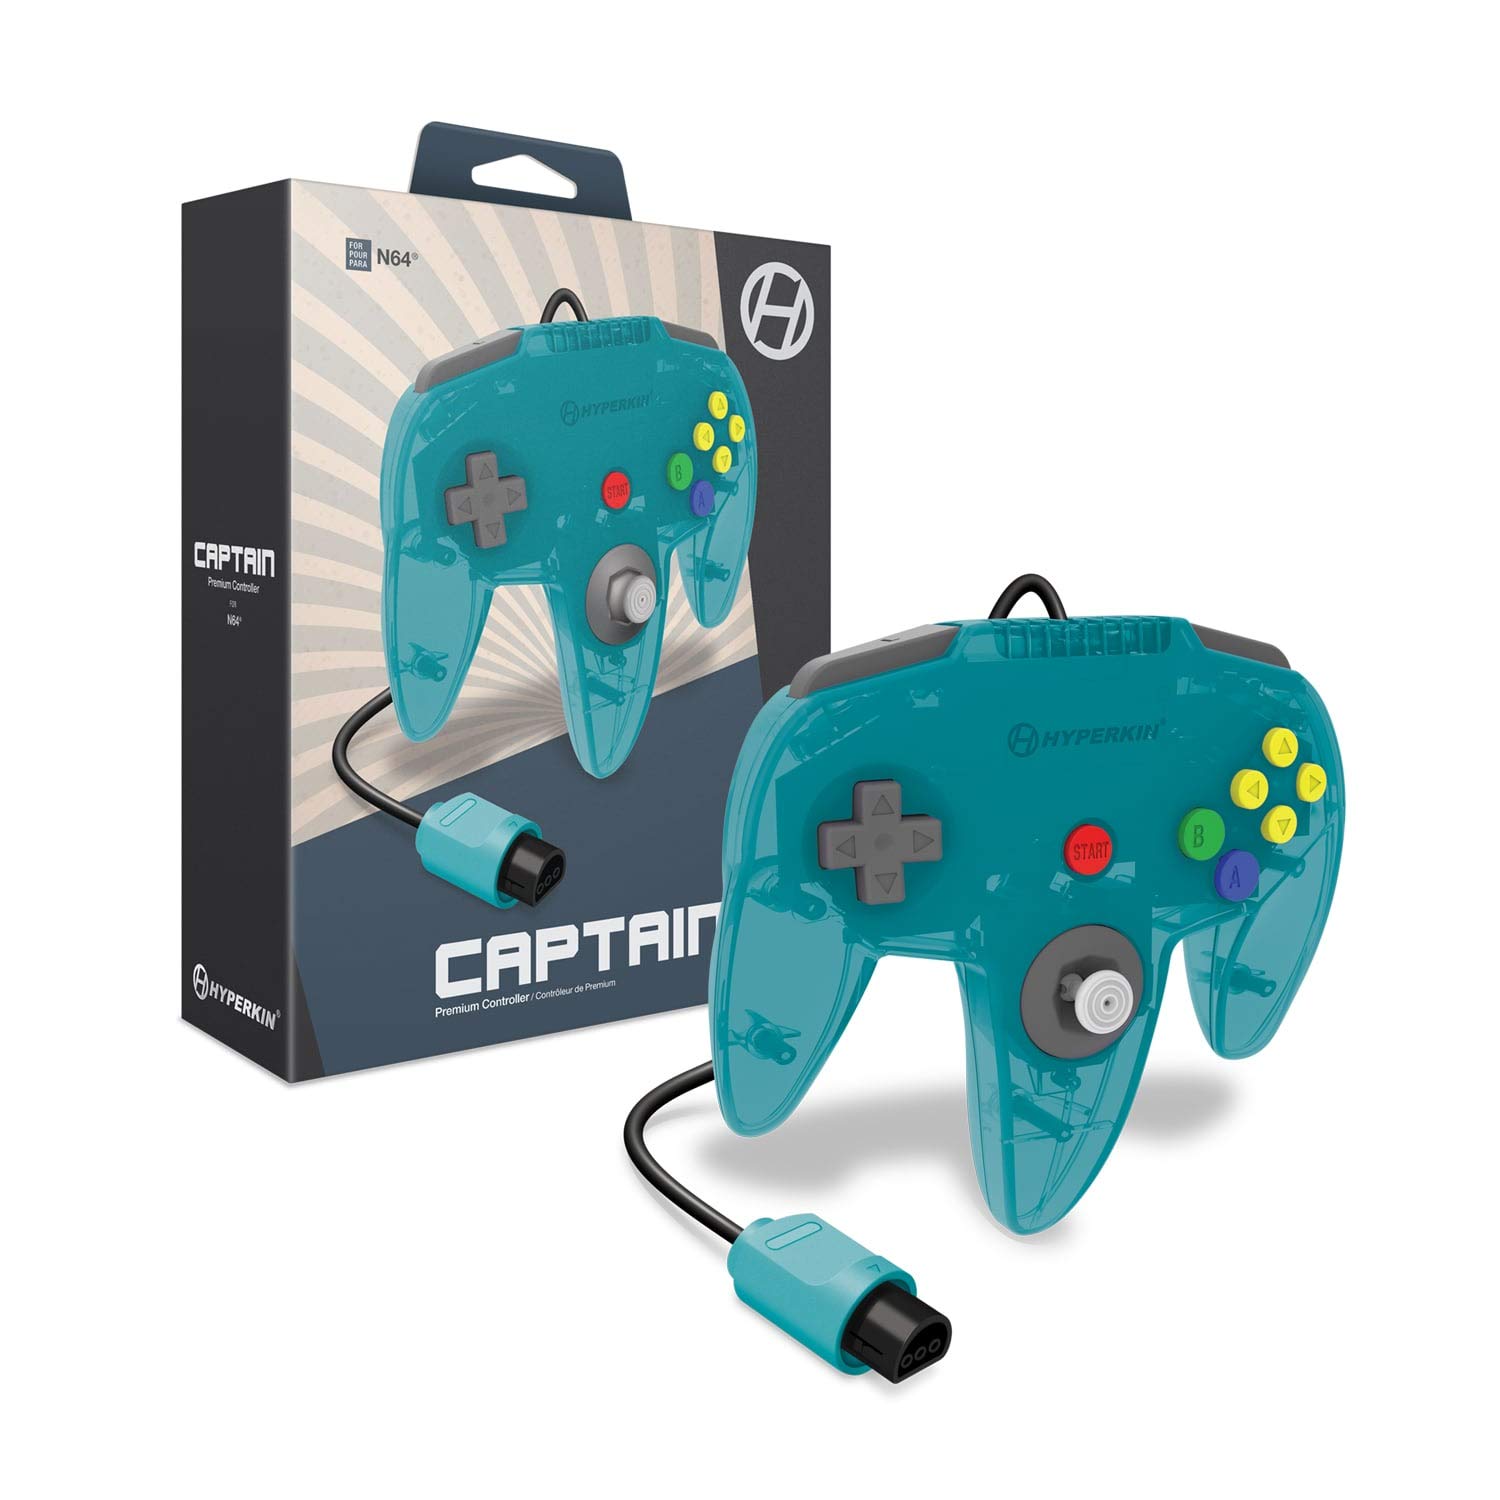 "Captain" Premium Controller for N64 Turquoise - Hyperkin (Y1)